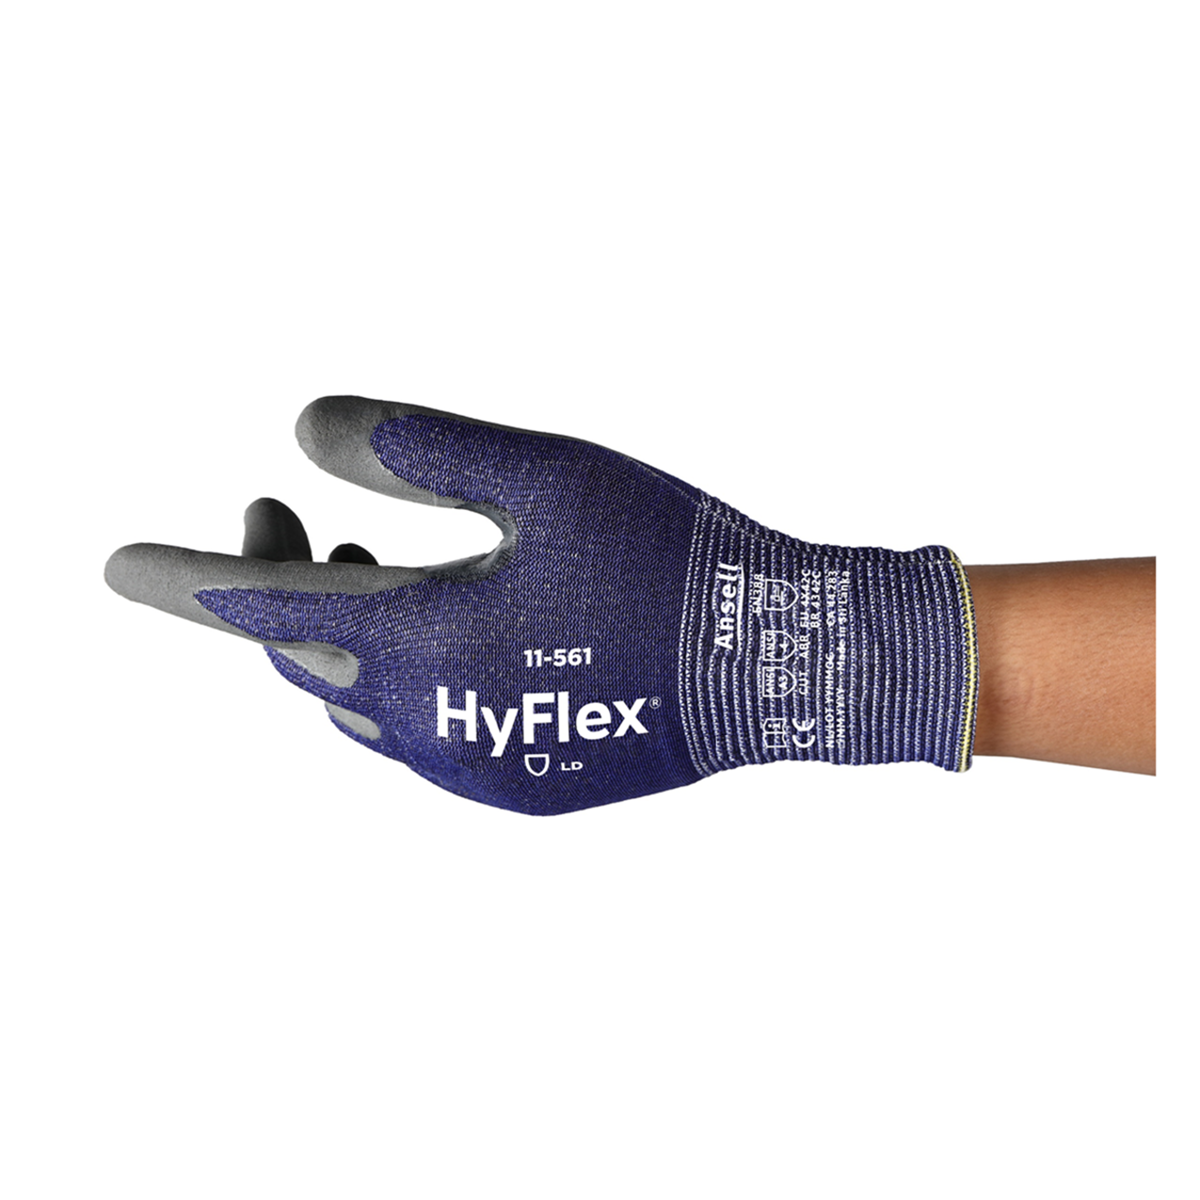 Ansell's guide to cut-resistant gloves and sleeves